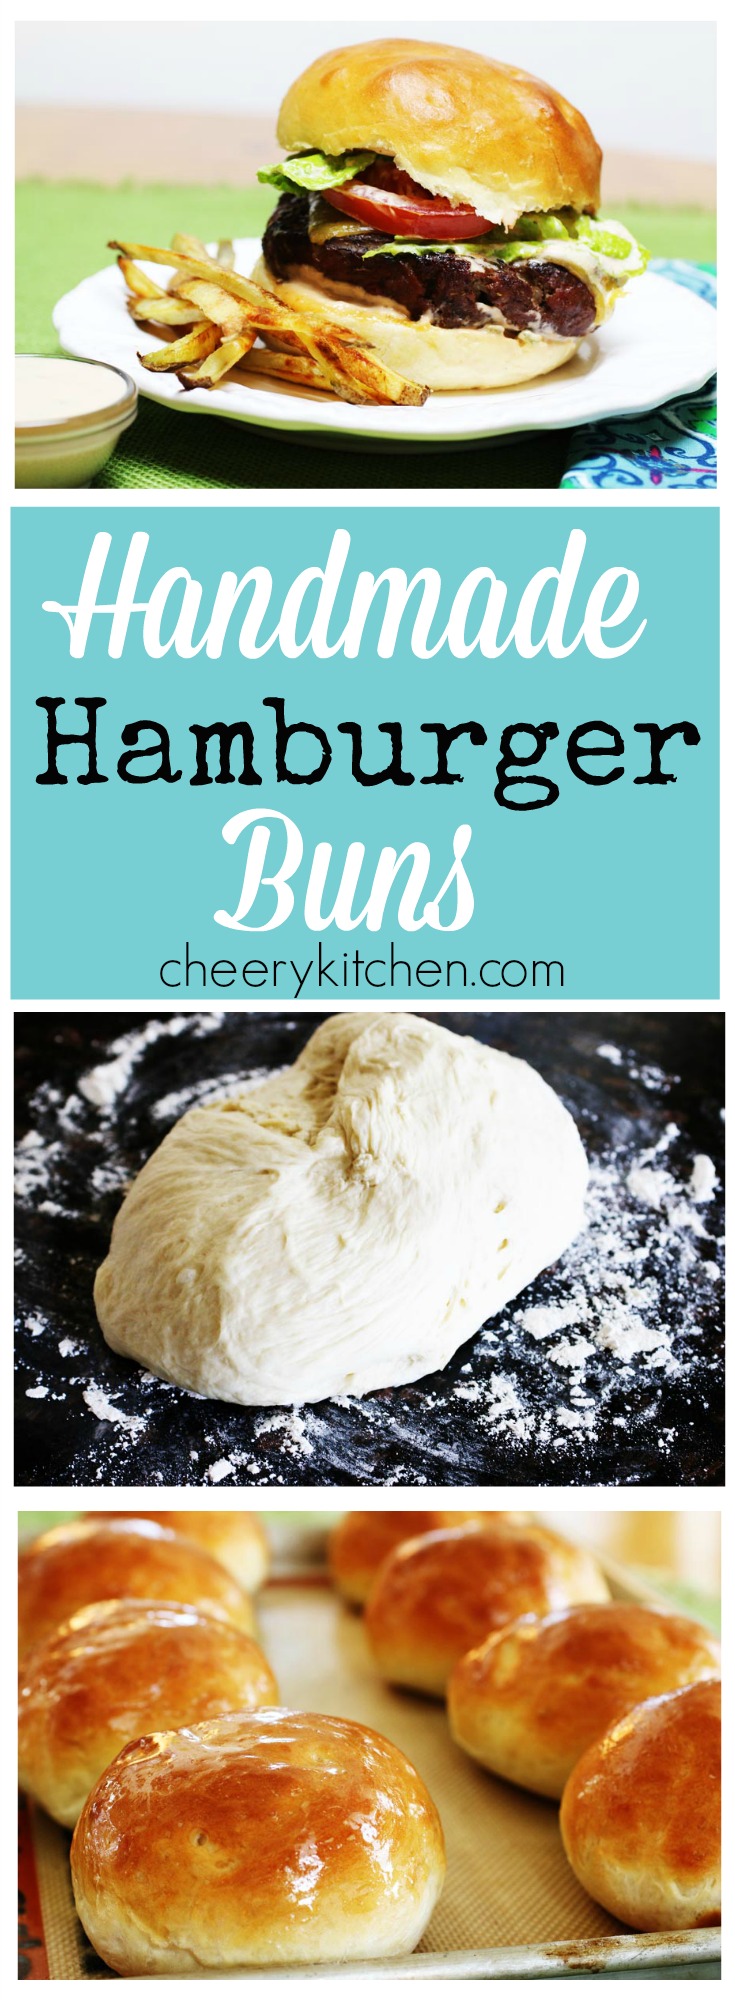 Kick your grilled burgers up a notch with Homemade Hamburger buns that are soft and chewy, so much better than what comes out of a plastic bag!